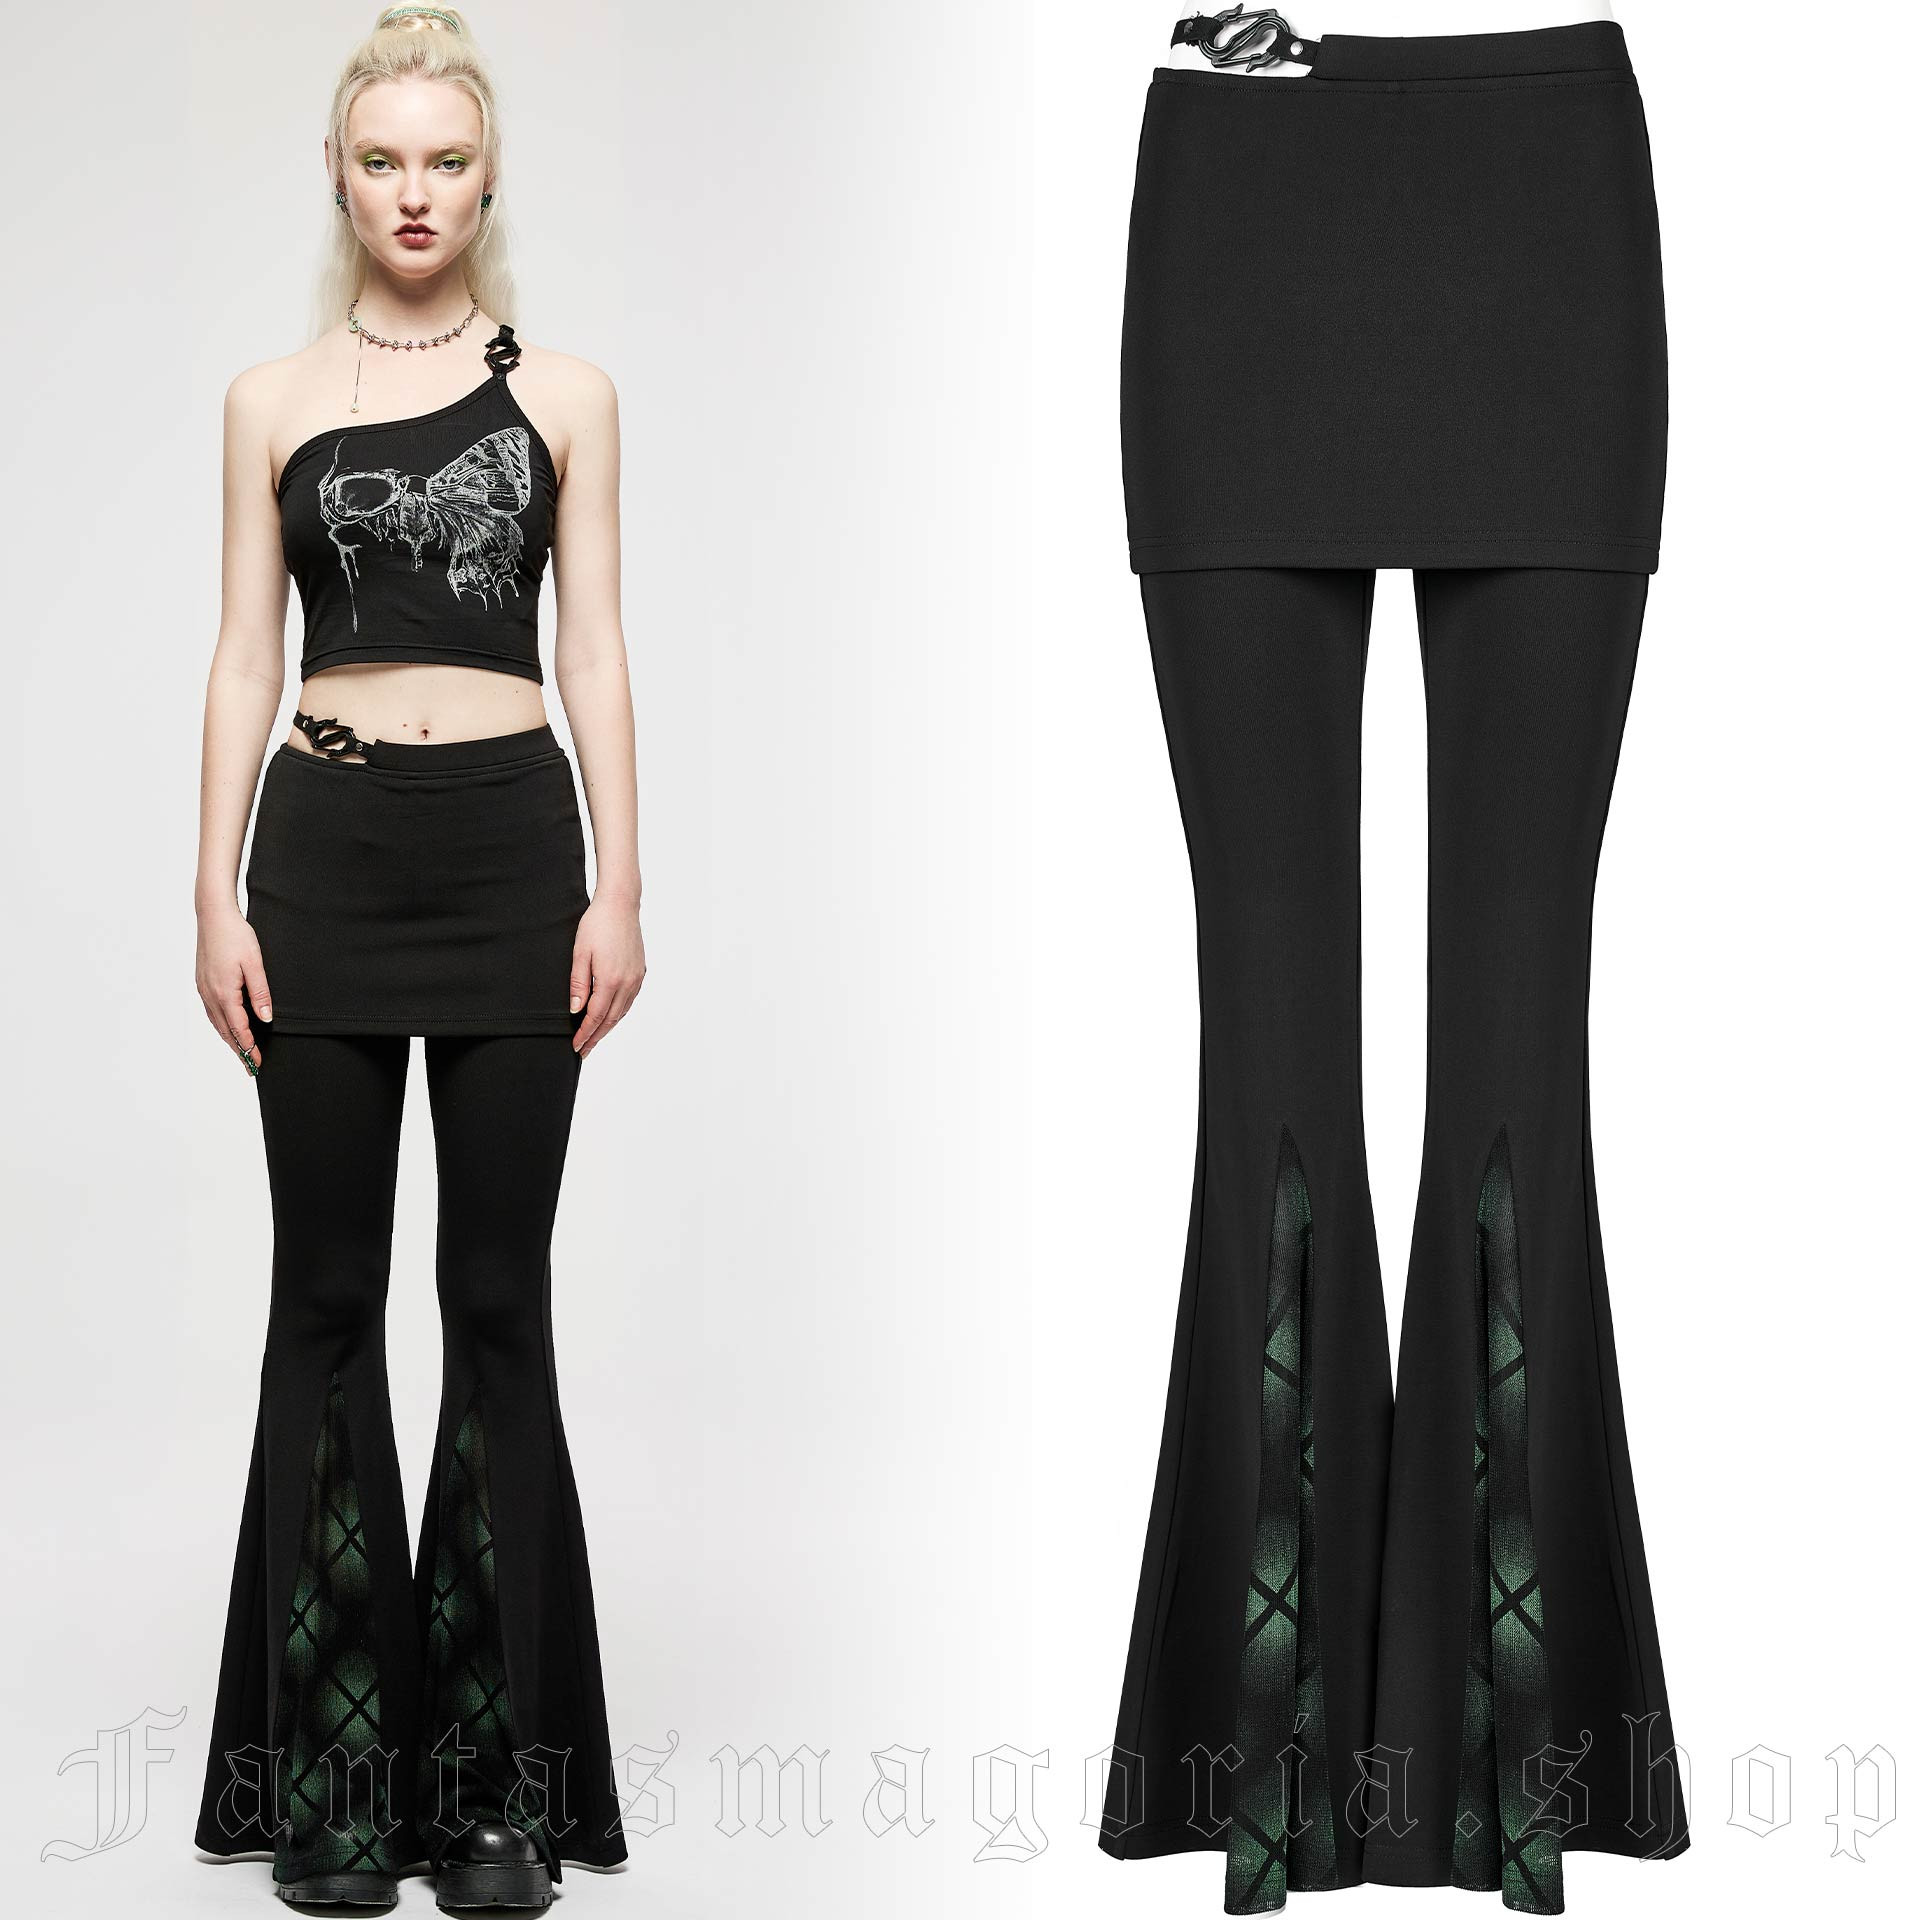 Butterfly Effect Black and Green Trousers Punk Rave OK-001DQF/BK 1